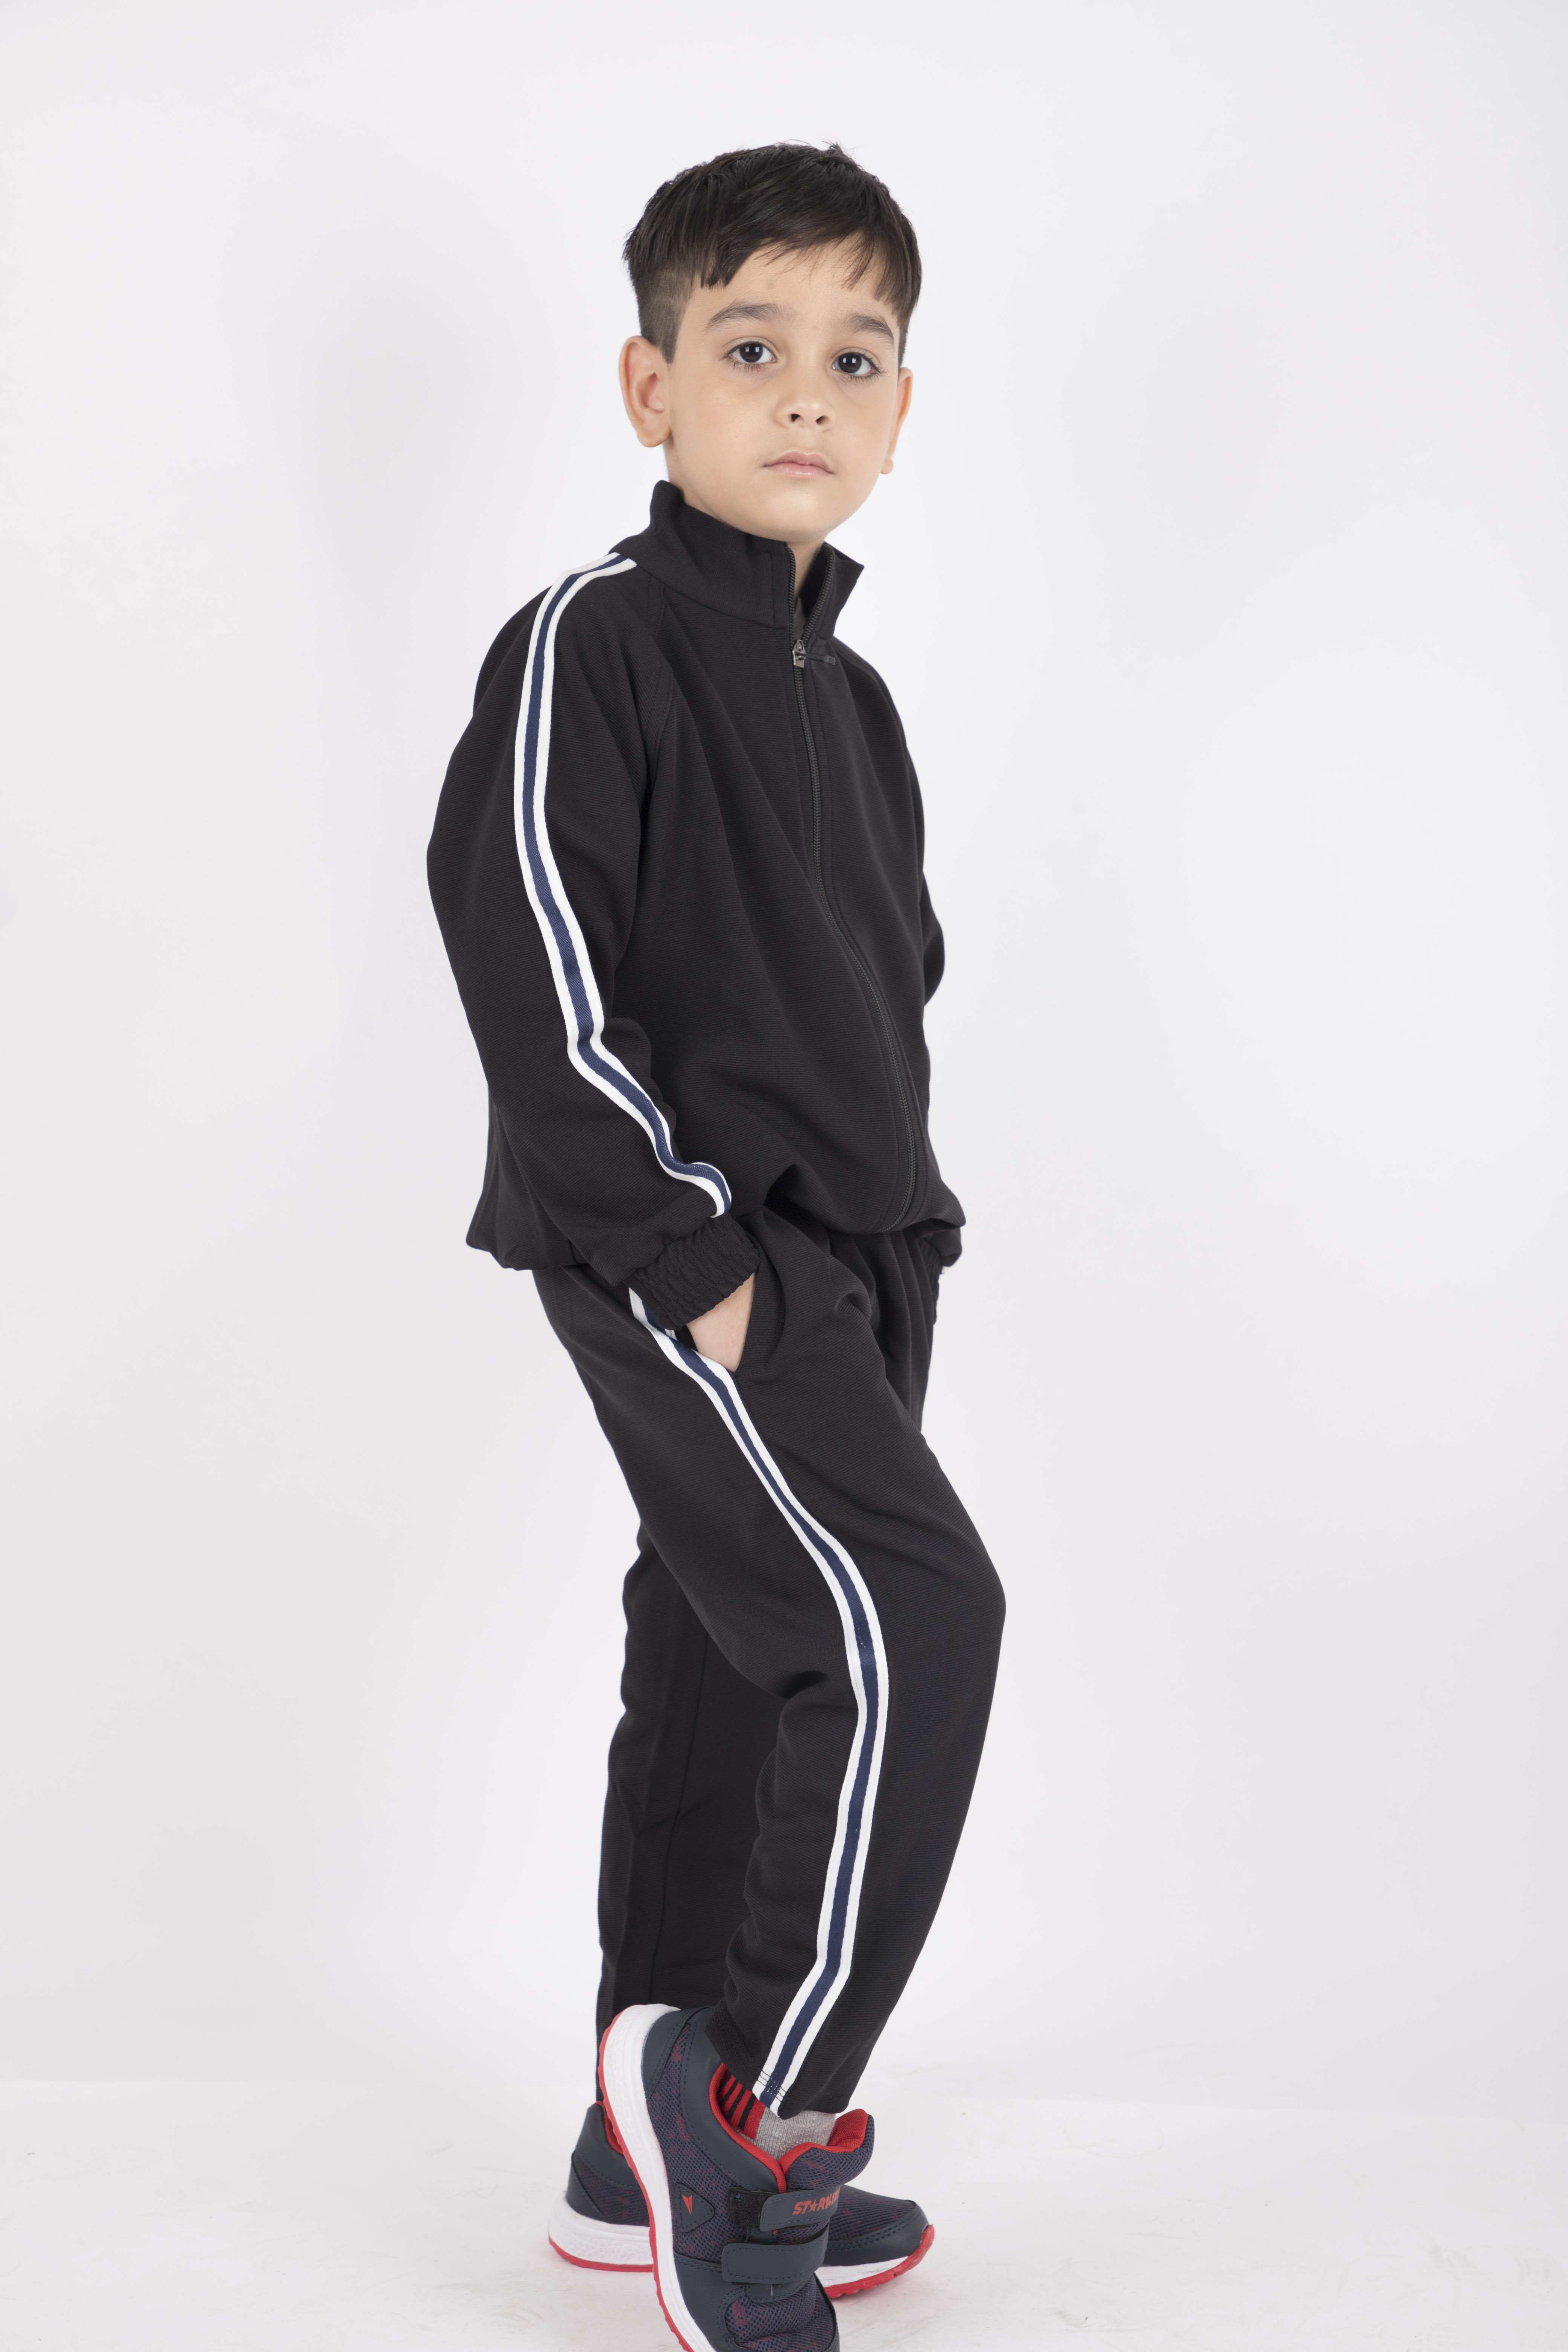 Buy iSHU Solid Boys Girls Track Suit Online @ ₹509 from ShopClues